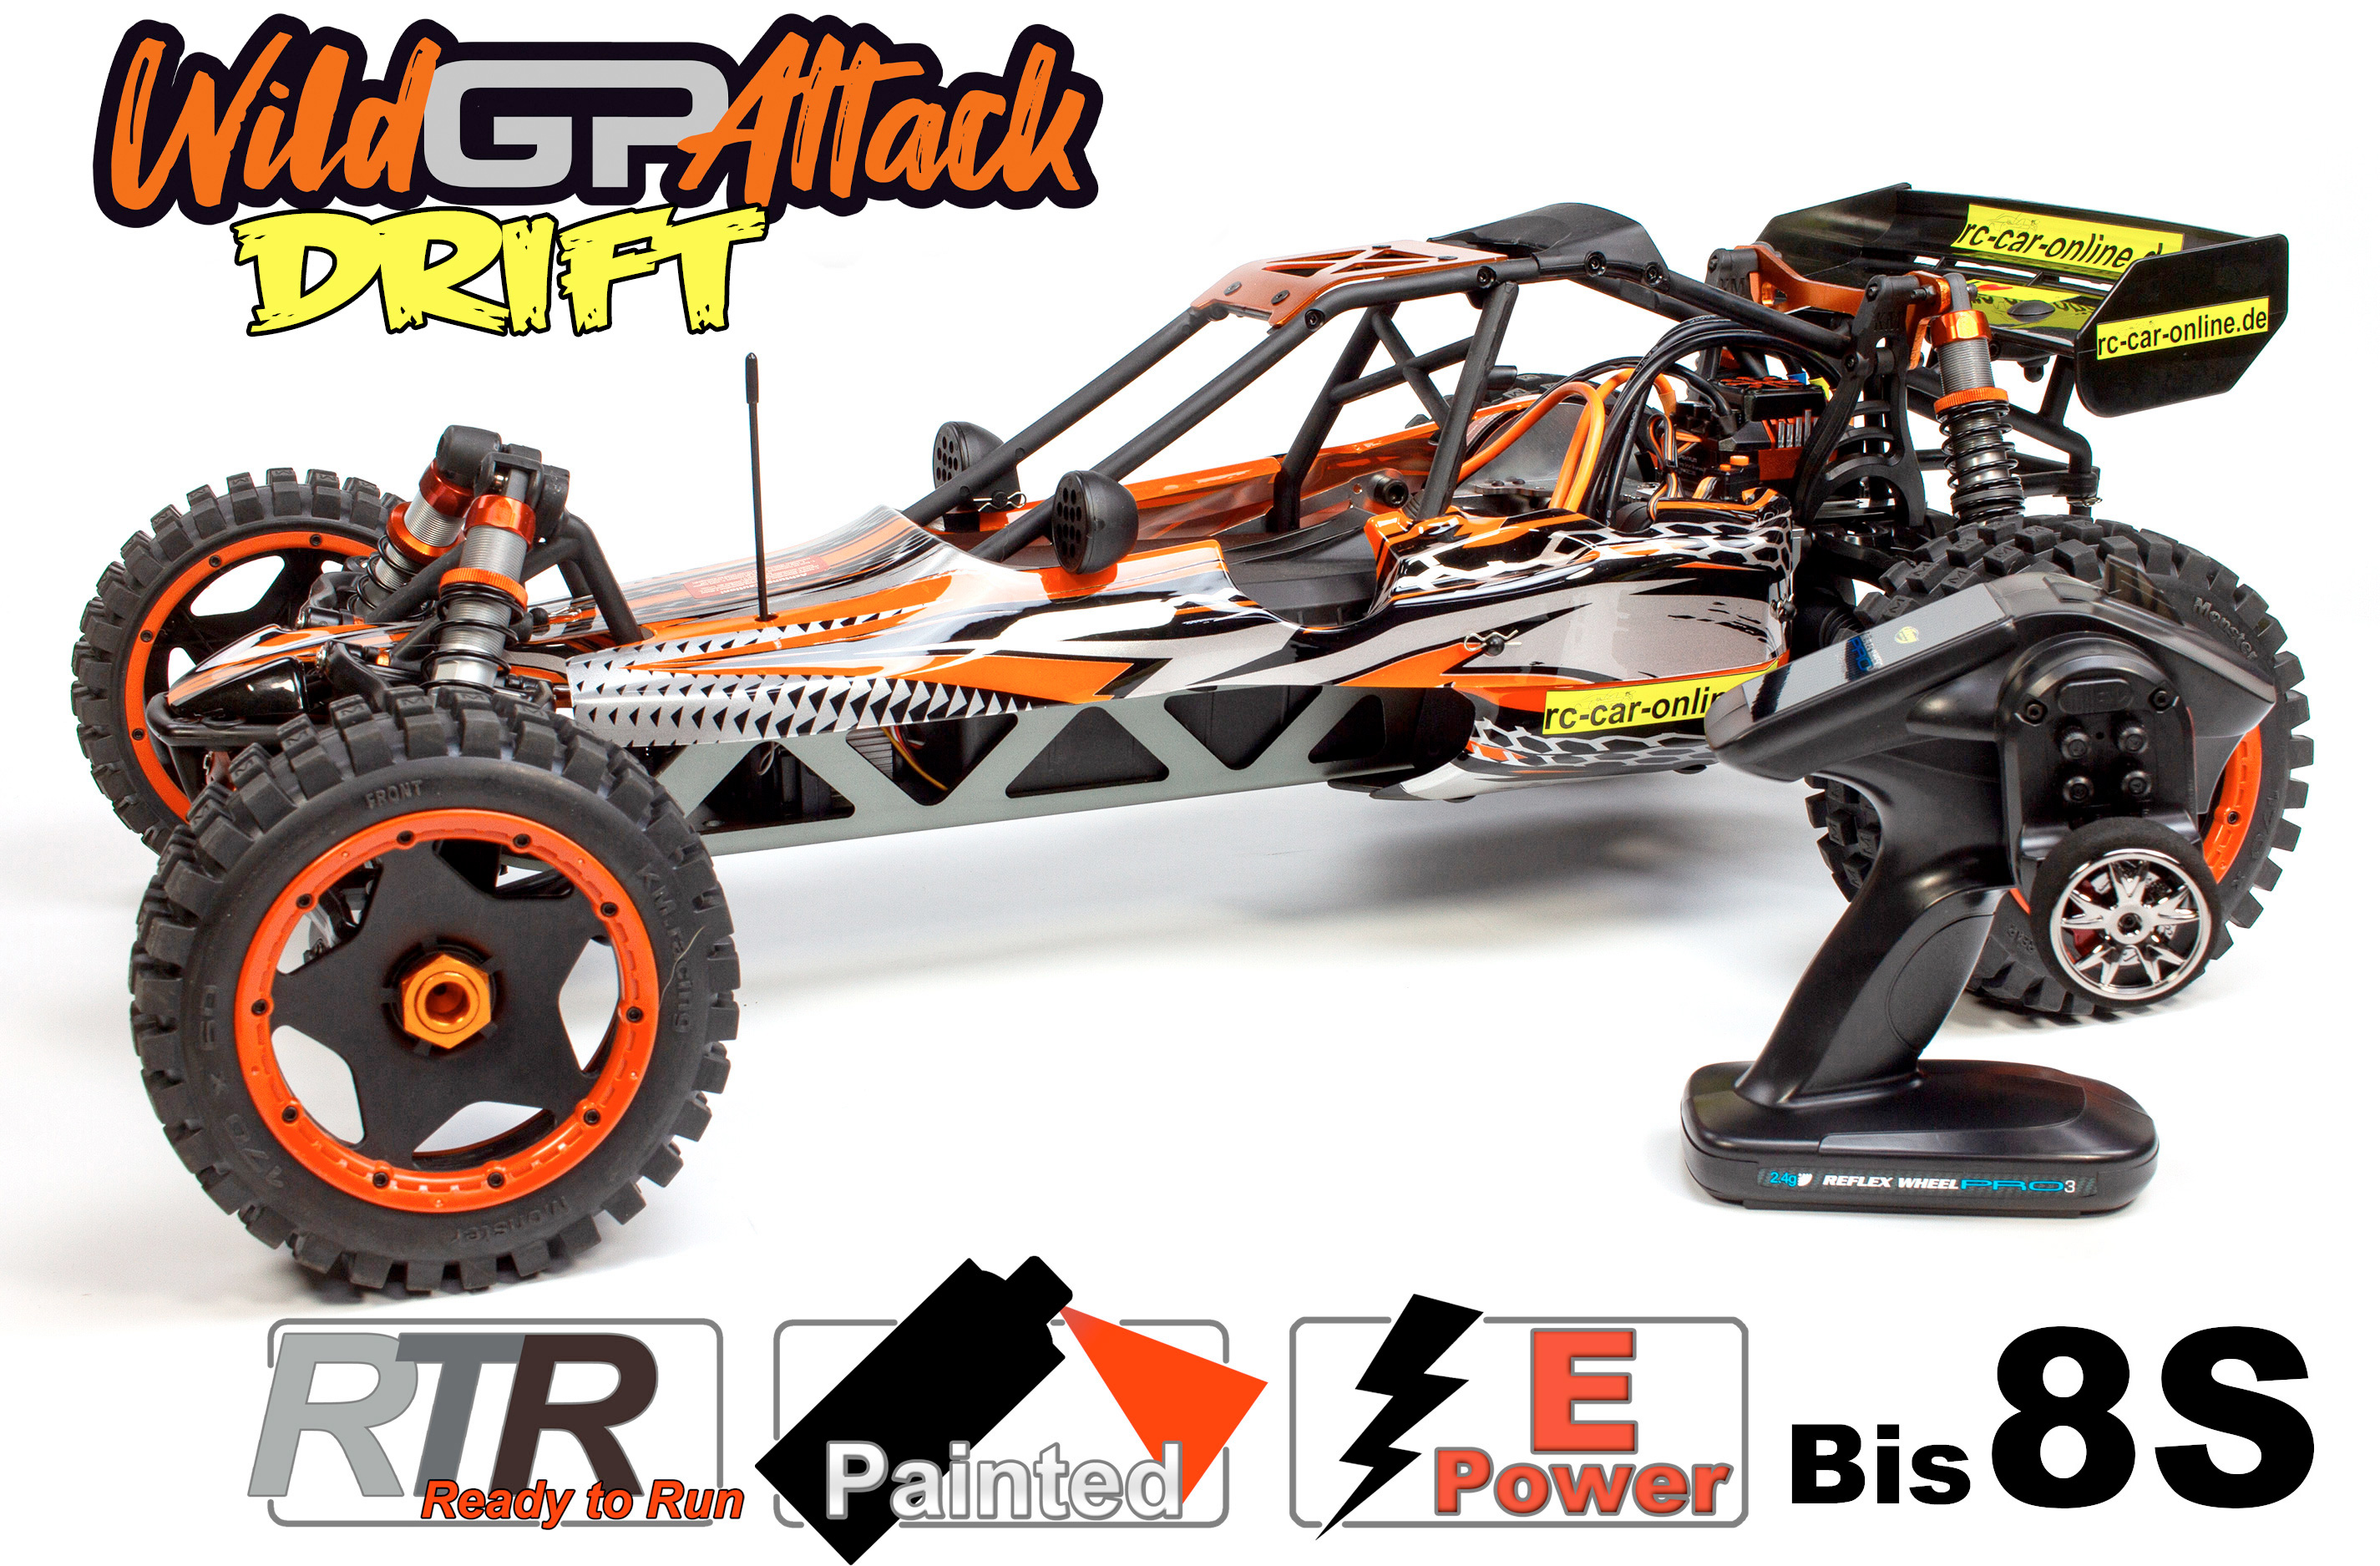 500304032/ED Carson 1:5 Wild GP Drift Attack Brushless 2.4GHz RTR, 200A / 700kV / up to 8S